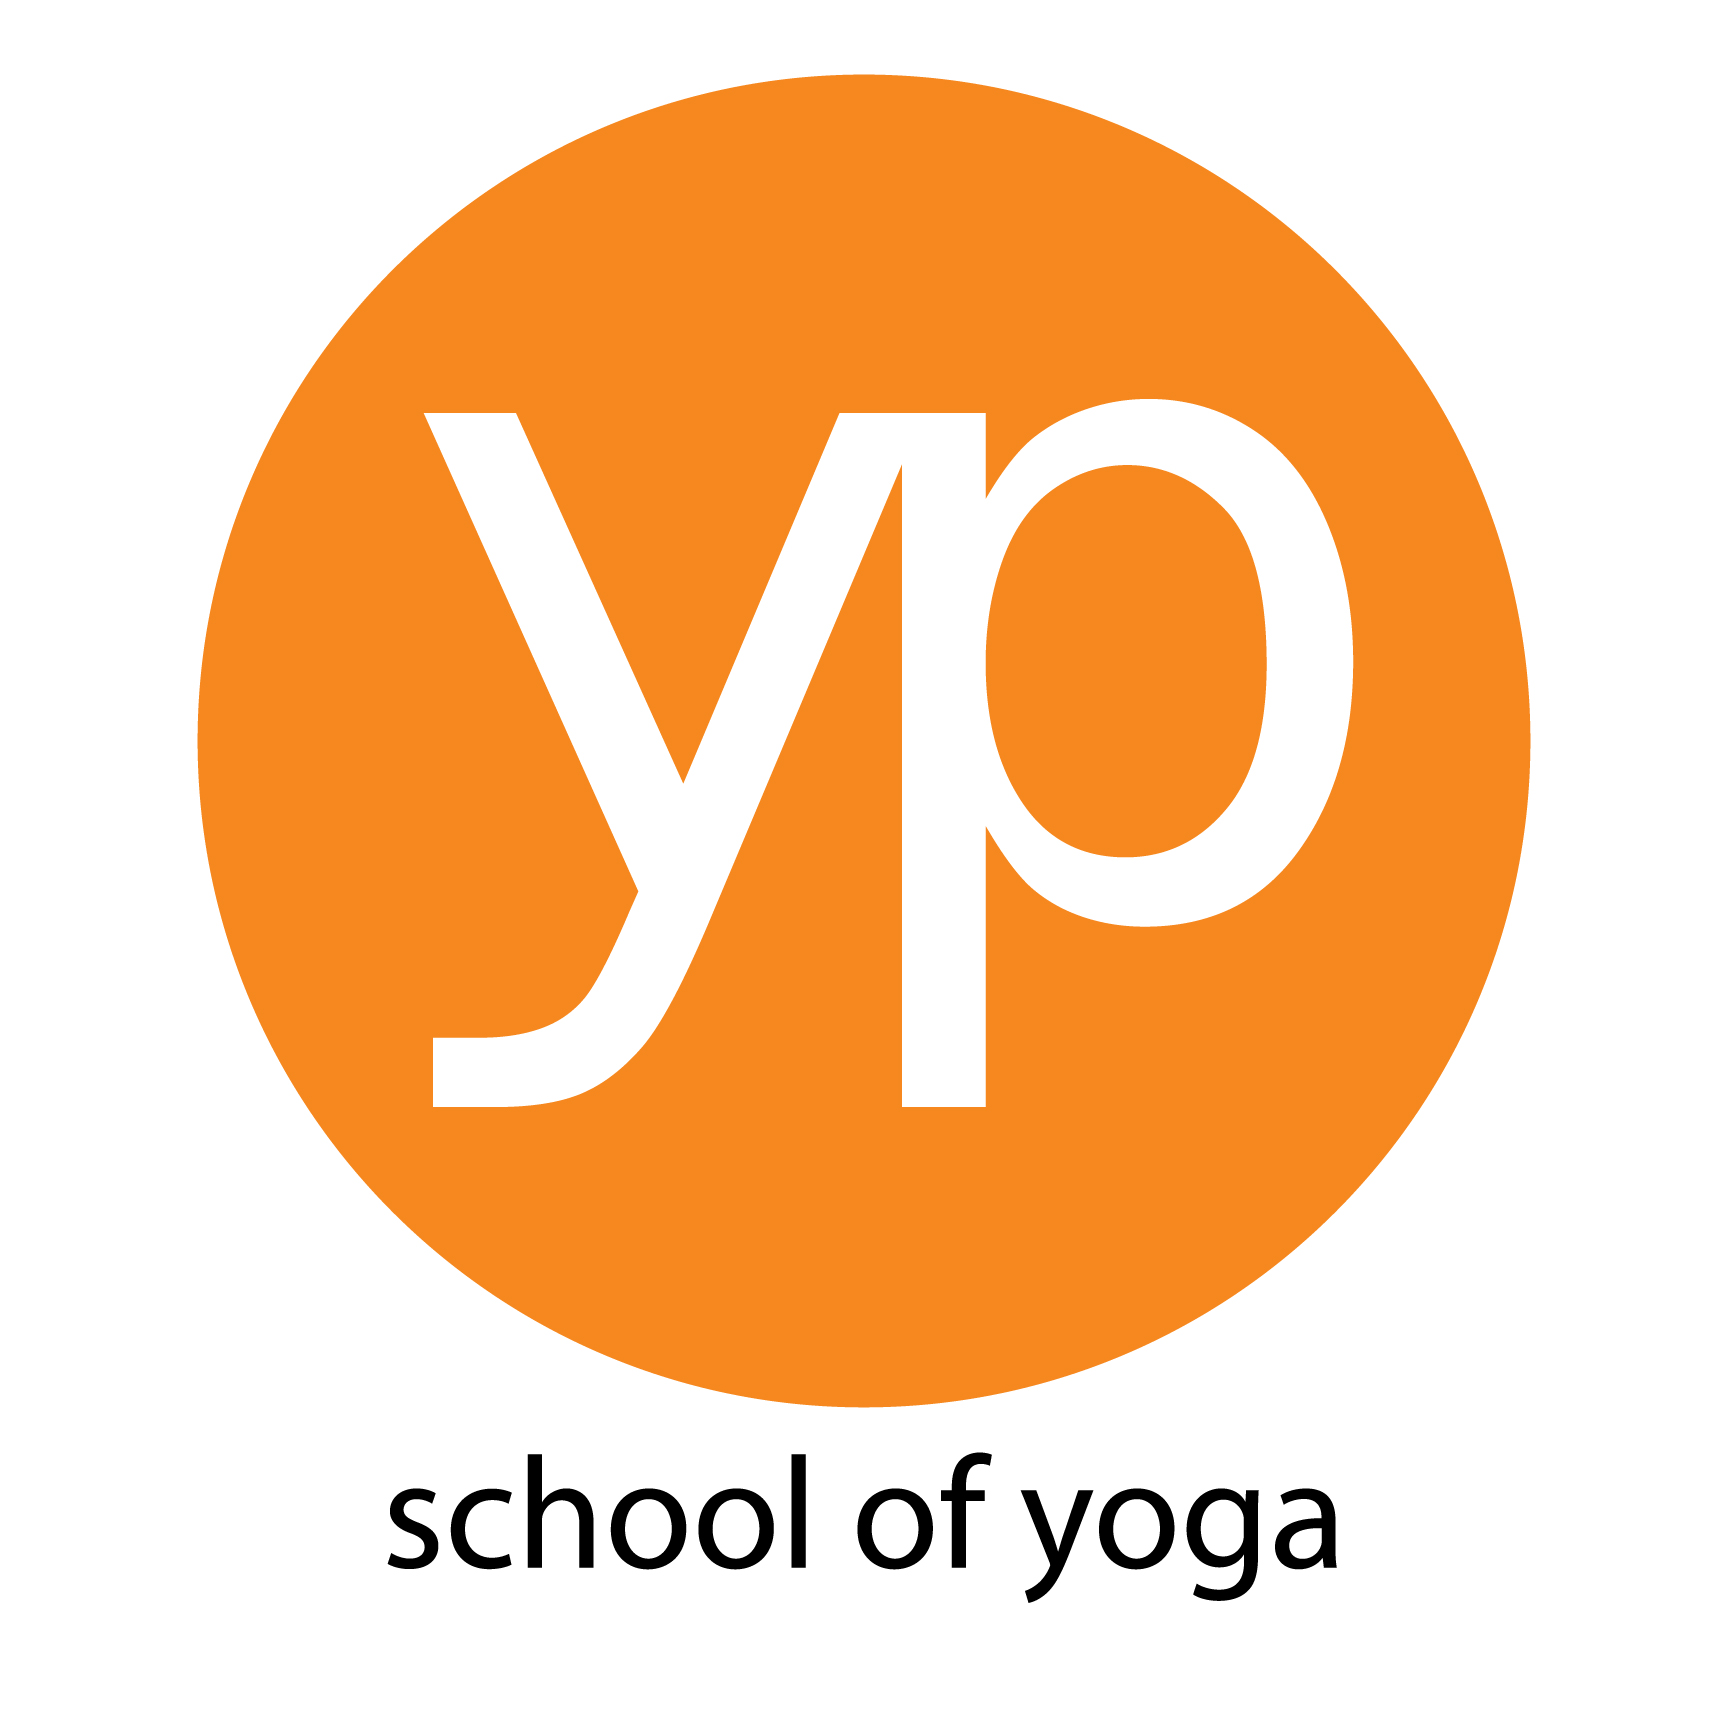 Vinyasa Class with Stacy Dockins at Yoga Project